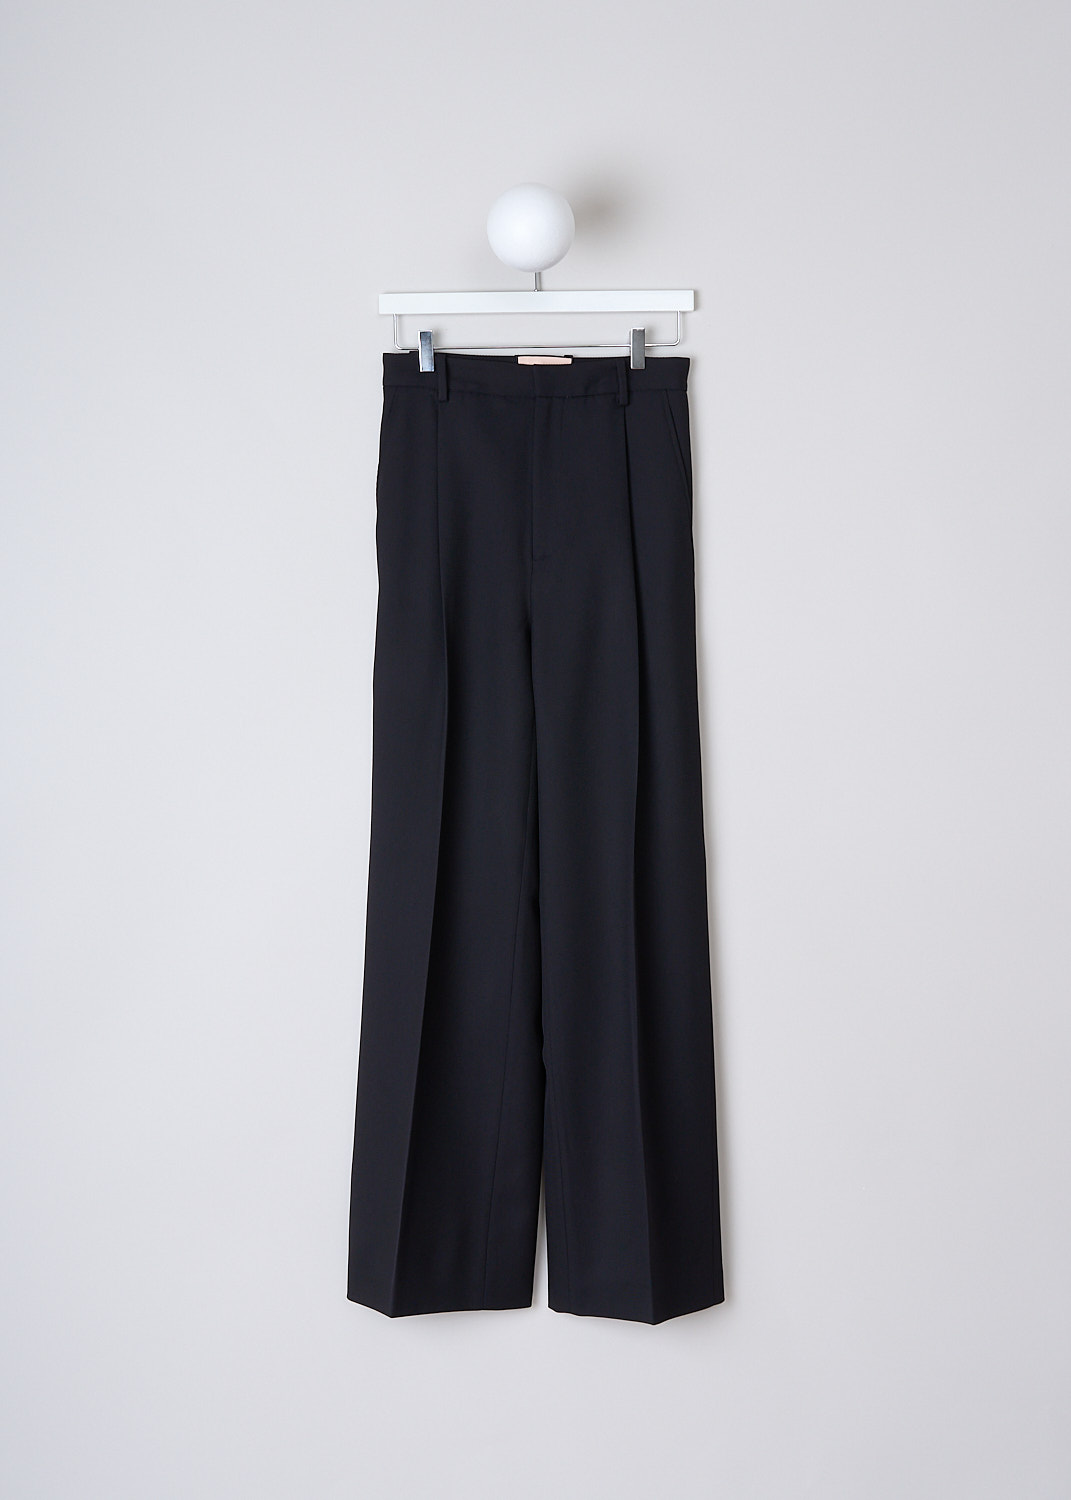 PLAN C, NAVY BLACK WOOL DRILL PANTS, PNCAA55L08_TW039_00B98, Black, Blue, Front, These navy black drill wool pants  have a waistband with belt loops and a button and zip closure. The pants are high-waisted with wide pant legs. Pressed centre creases run along the length of the pant legs. These pants have slanted pockets in the front. In the back, the pants have one flap welt pocket and one buttoned welt pocket. 
